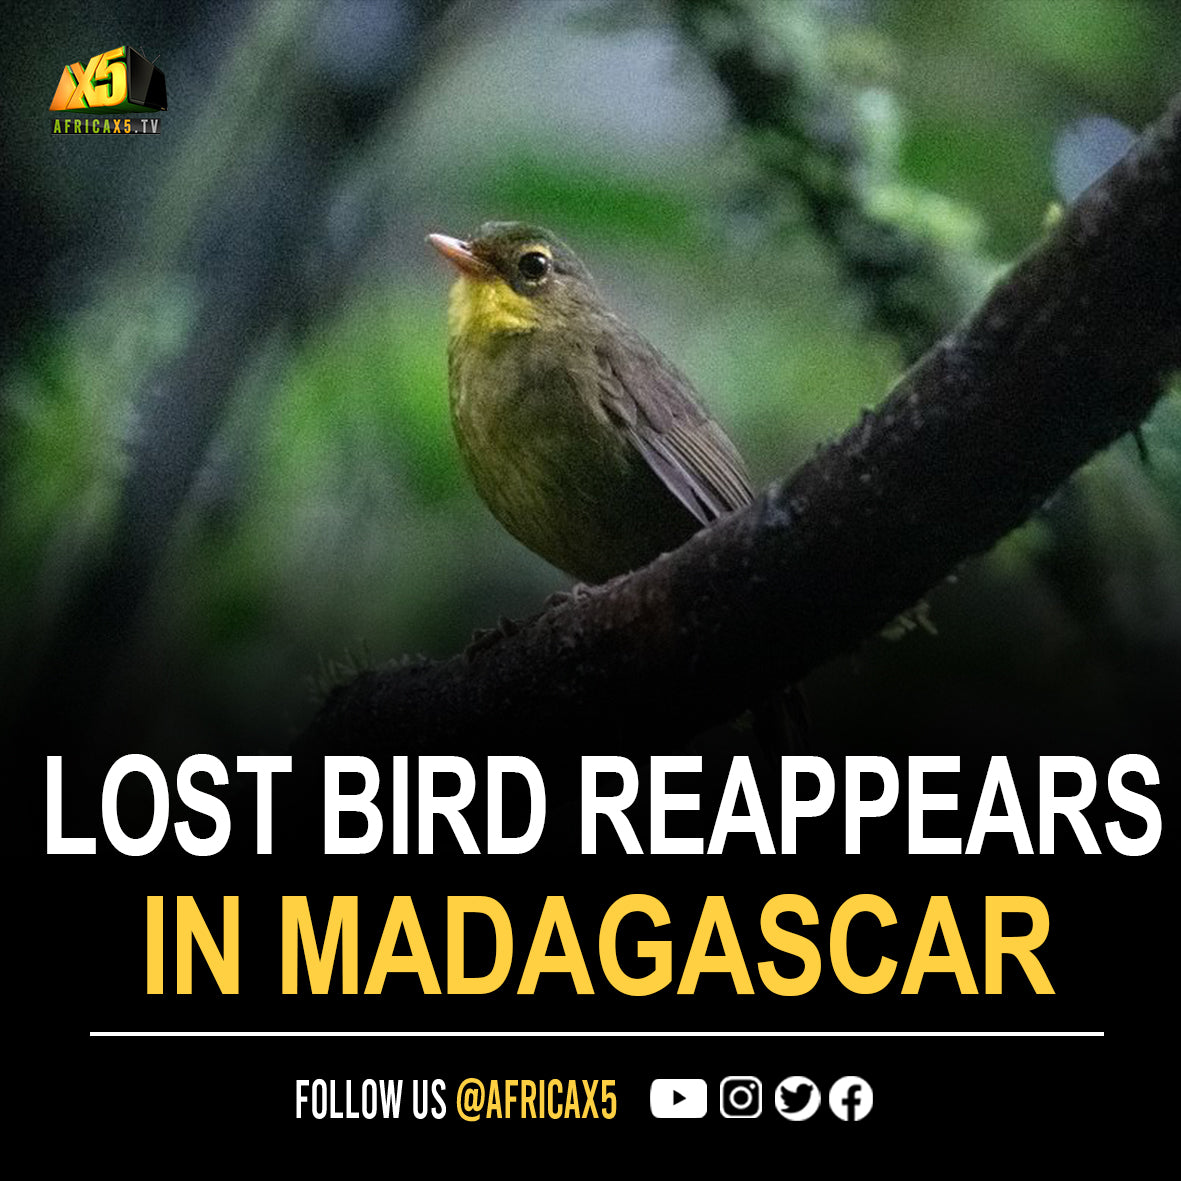 After a 24-year game of hide-and-seek, the dark tetraka, a small passerine species living only in Madagascar, has once again reared its beak, much to the relief of the scientific community.